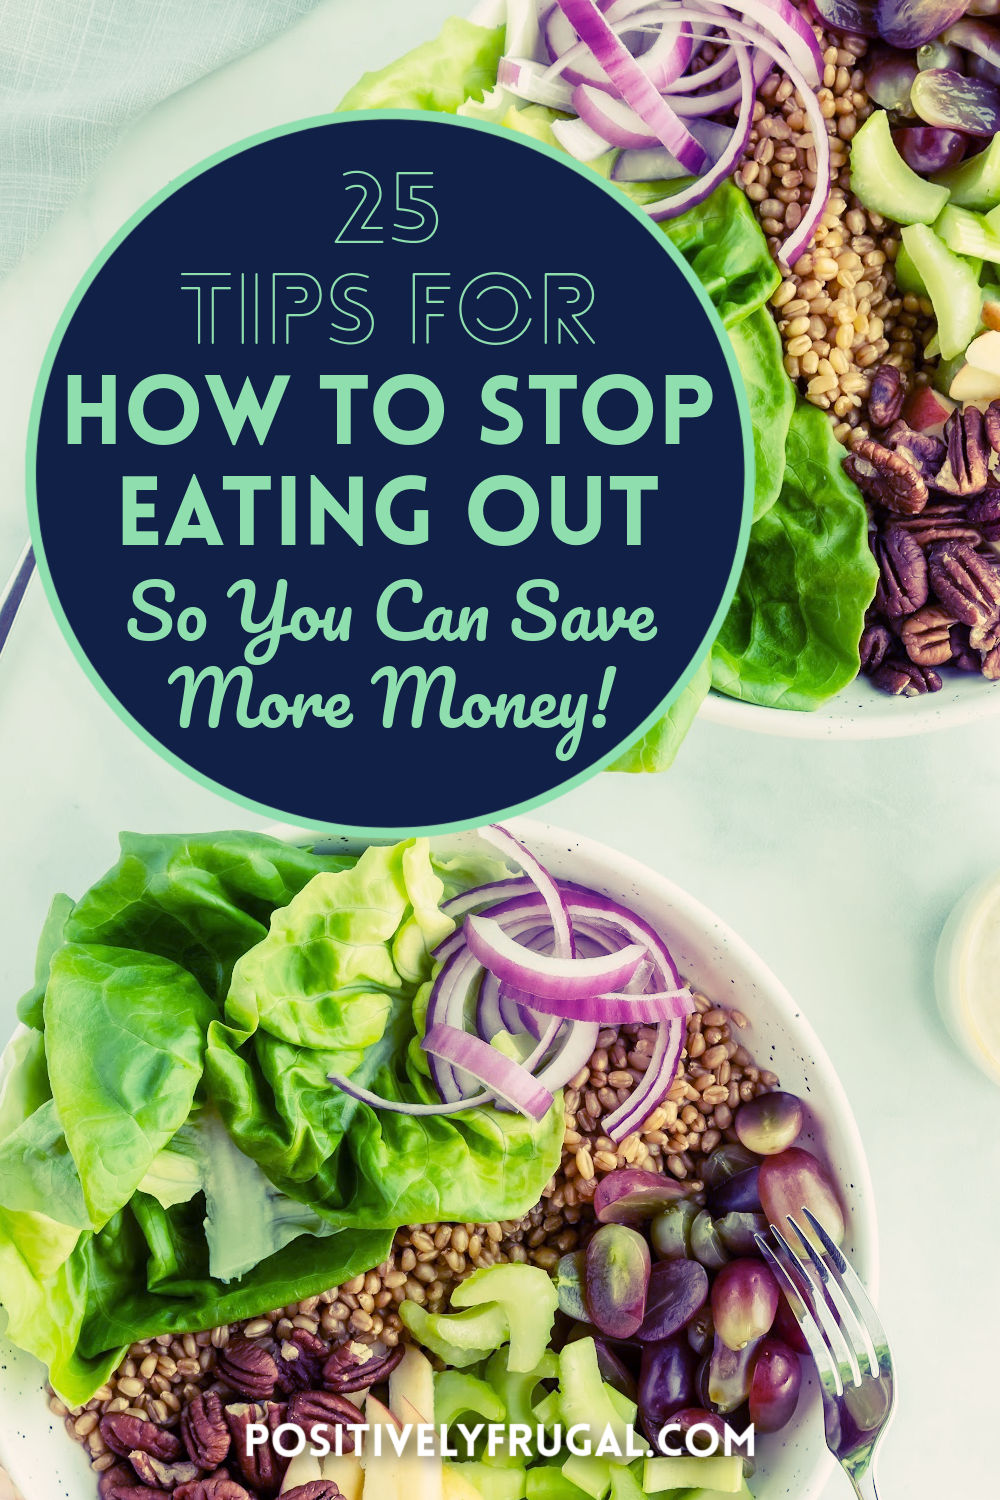 25 Tips for How To Stop Eating Out So YOu Can Save More Money by PositivelyFrugal.com